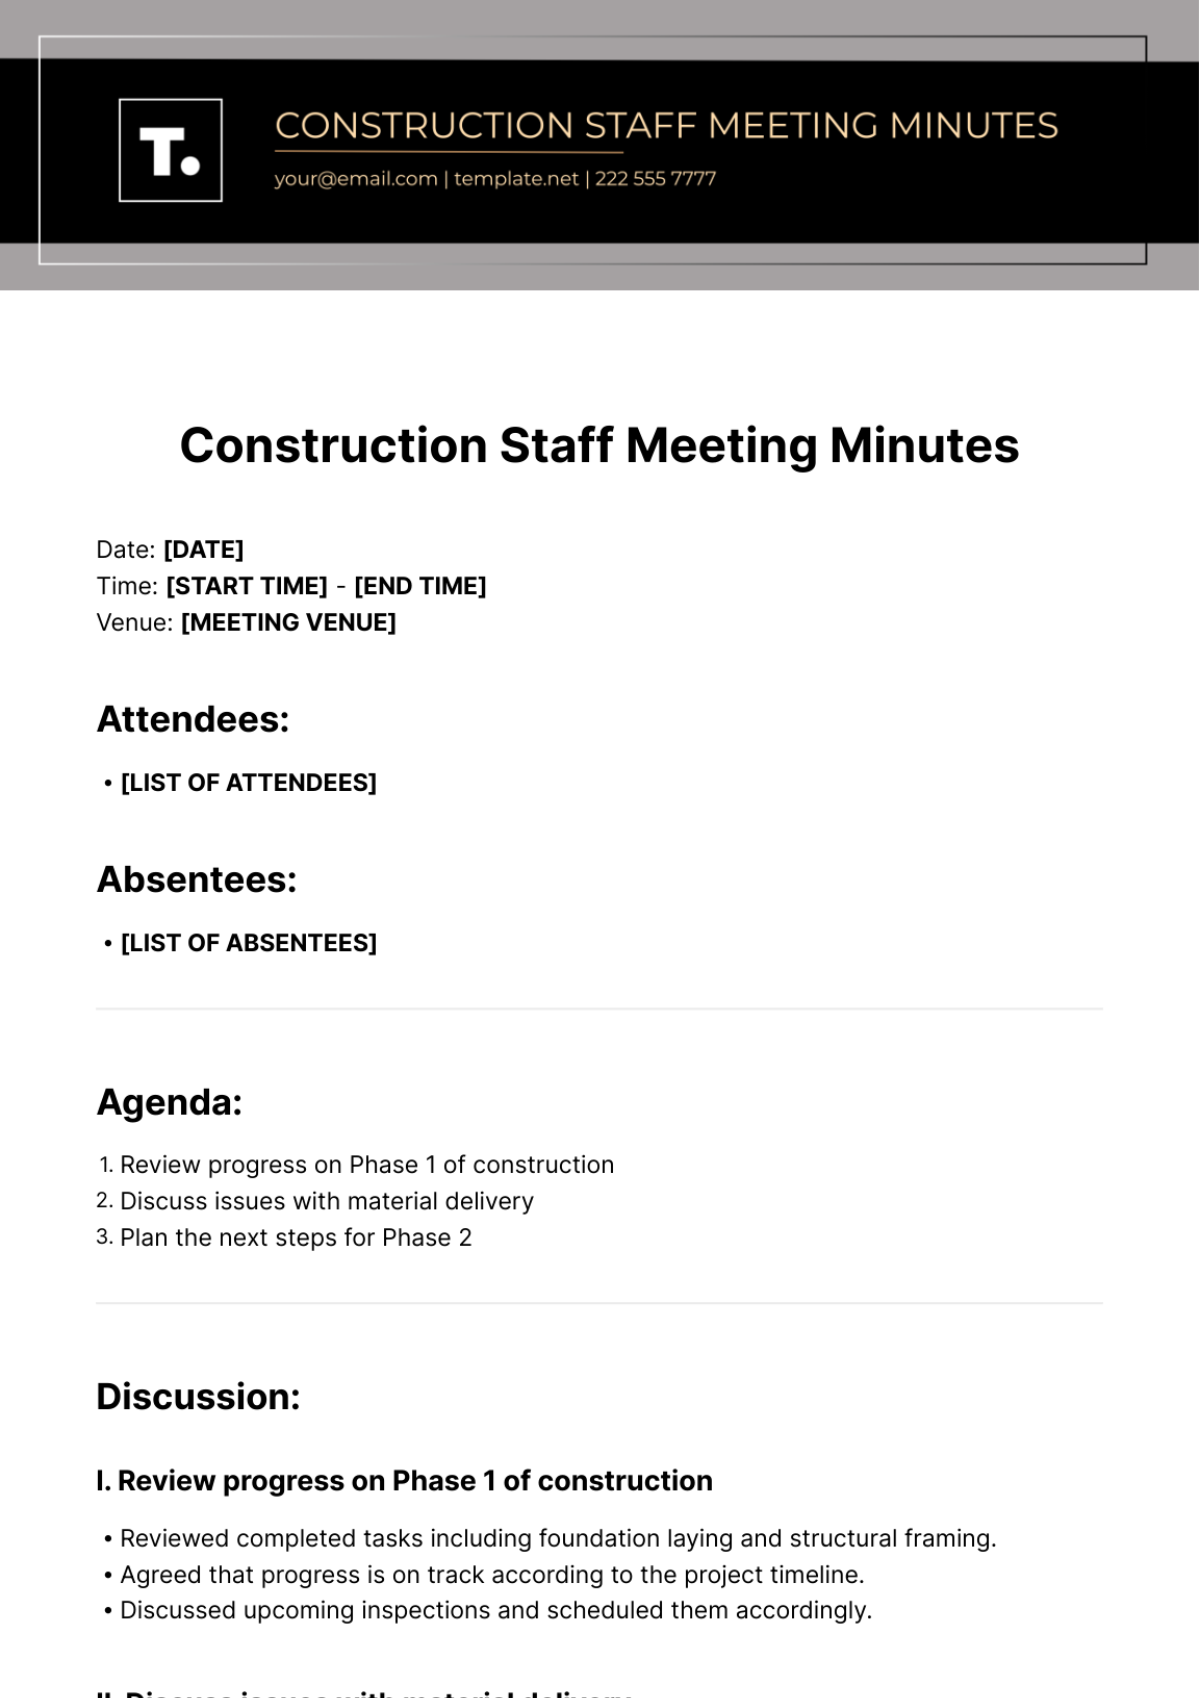 Construction Staff Meeting Minutes Template